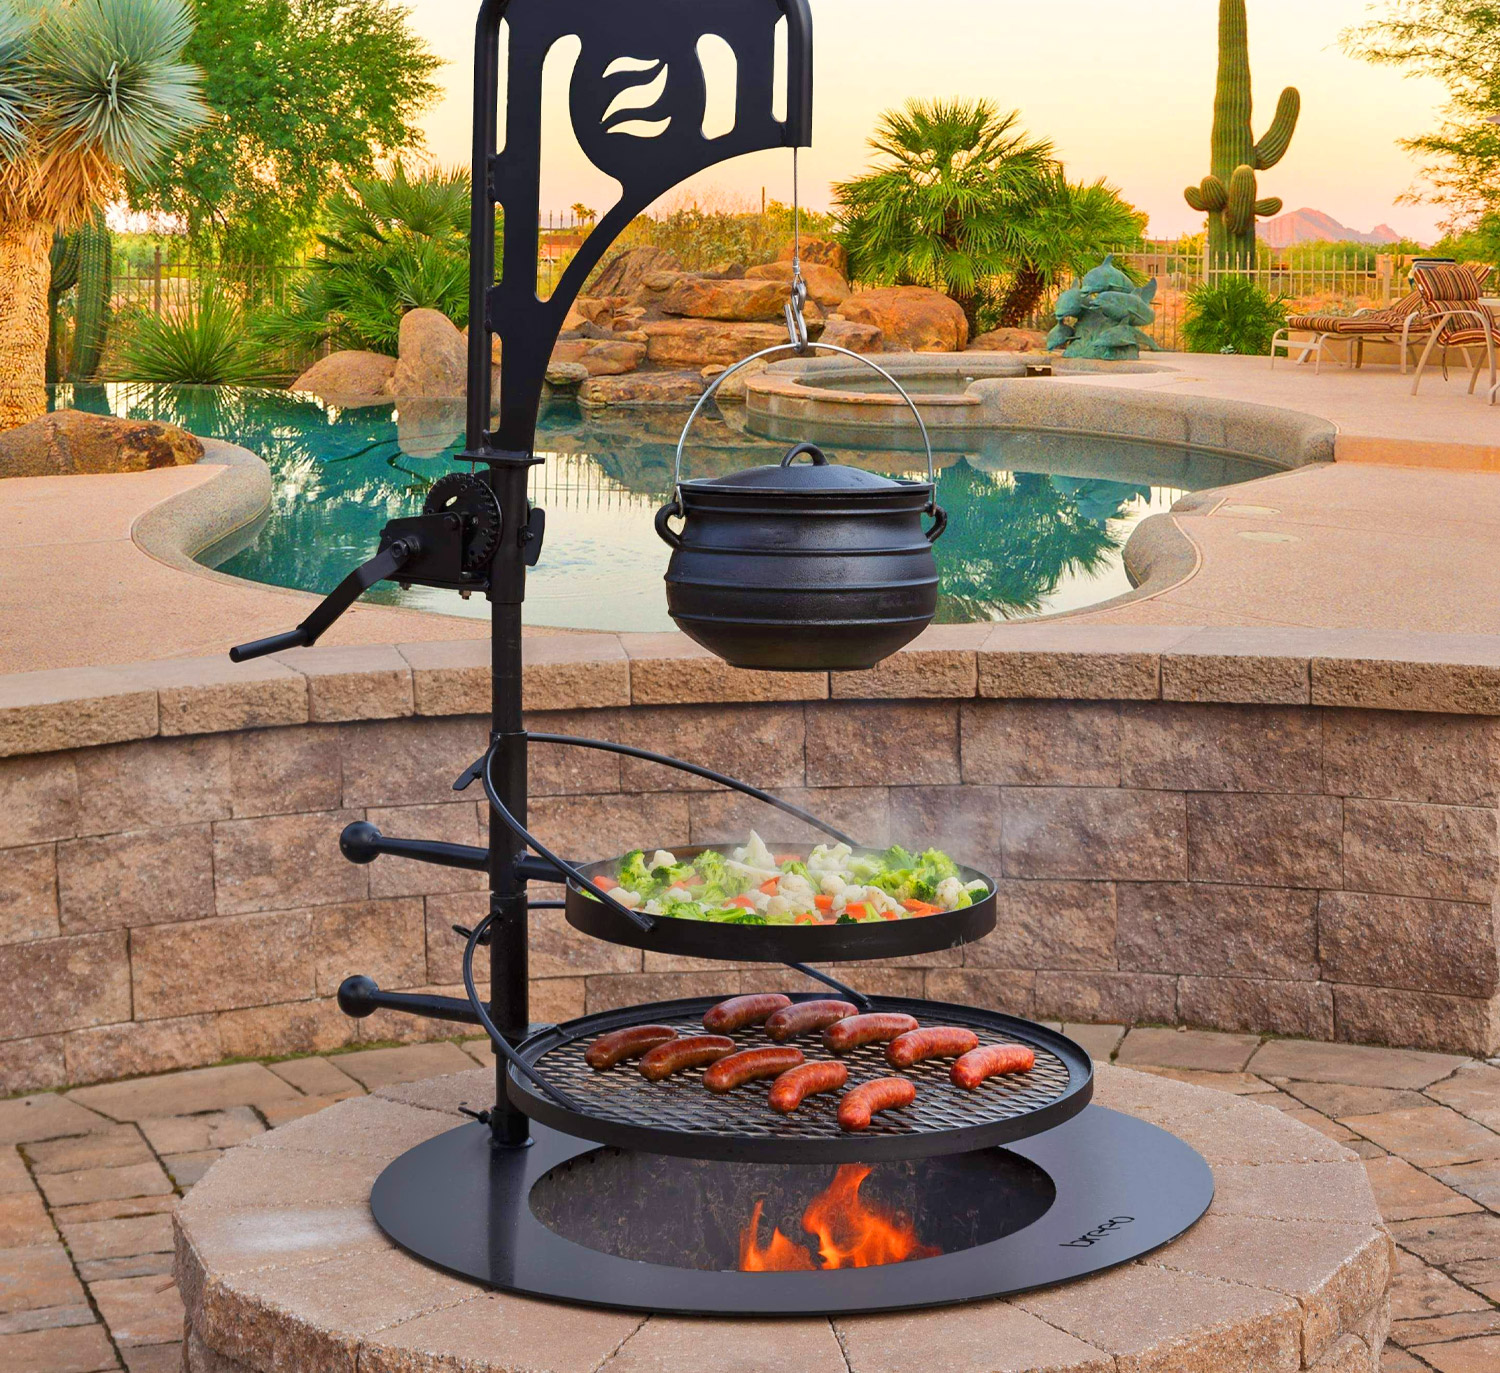 Fire Pit Into A Tiered Cooking Machine, Fire Pit Grill